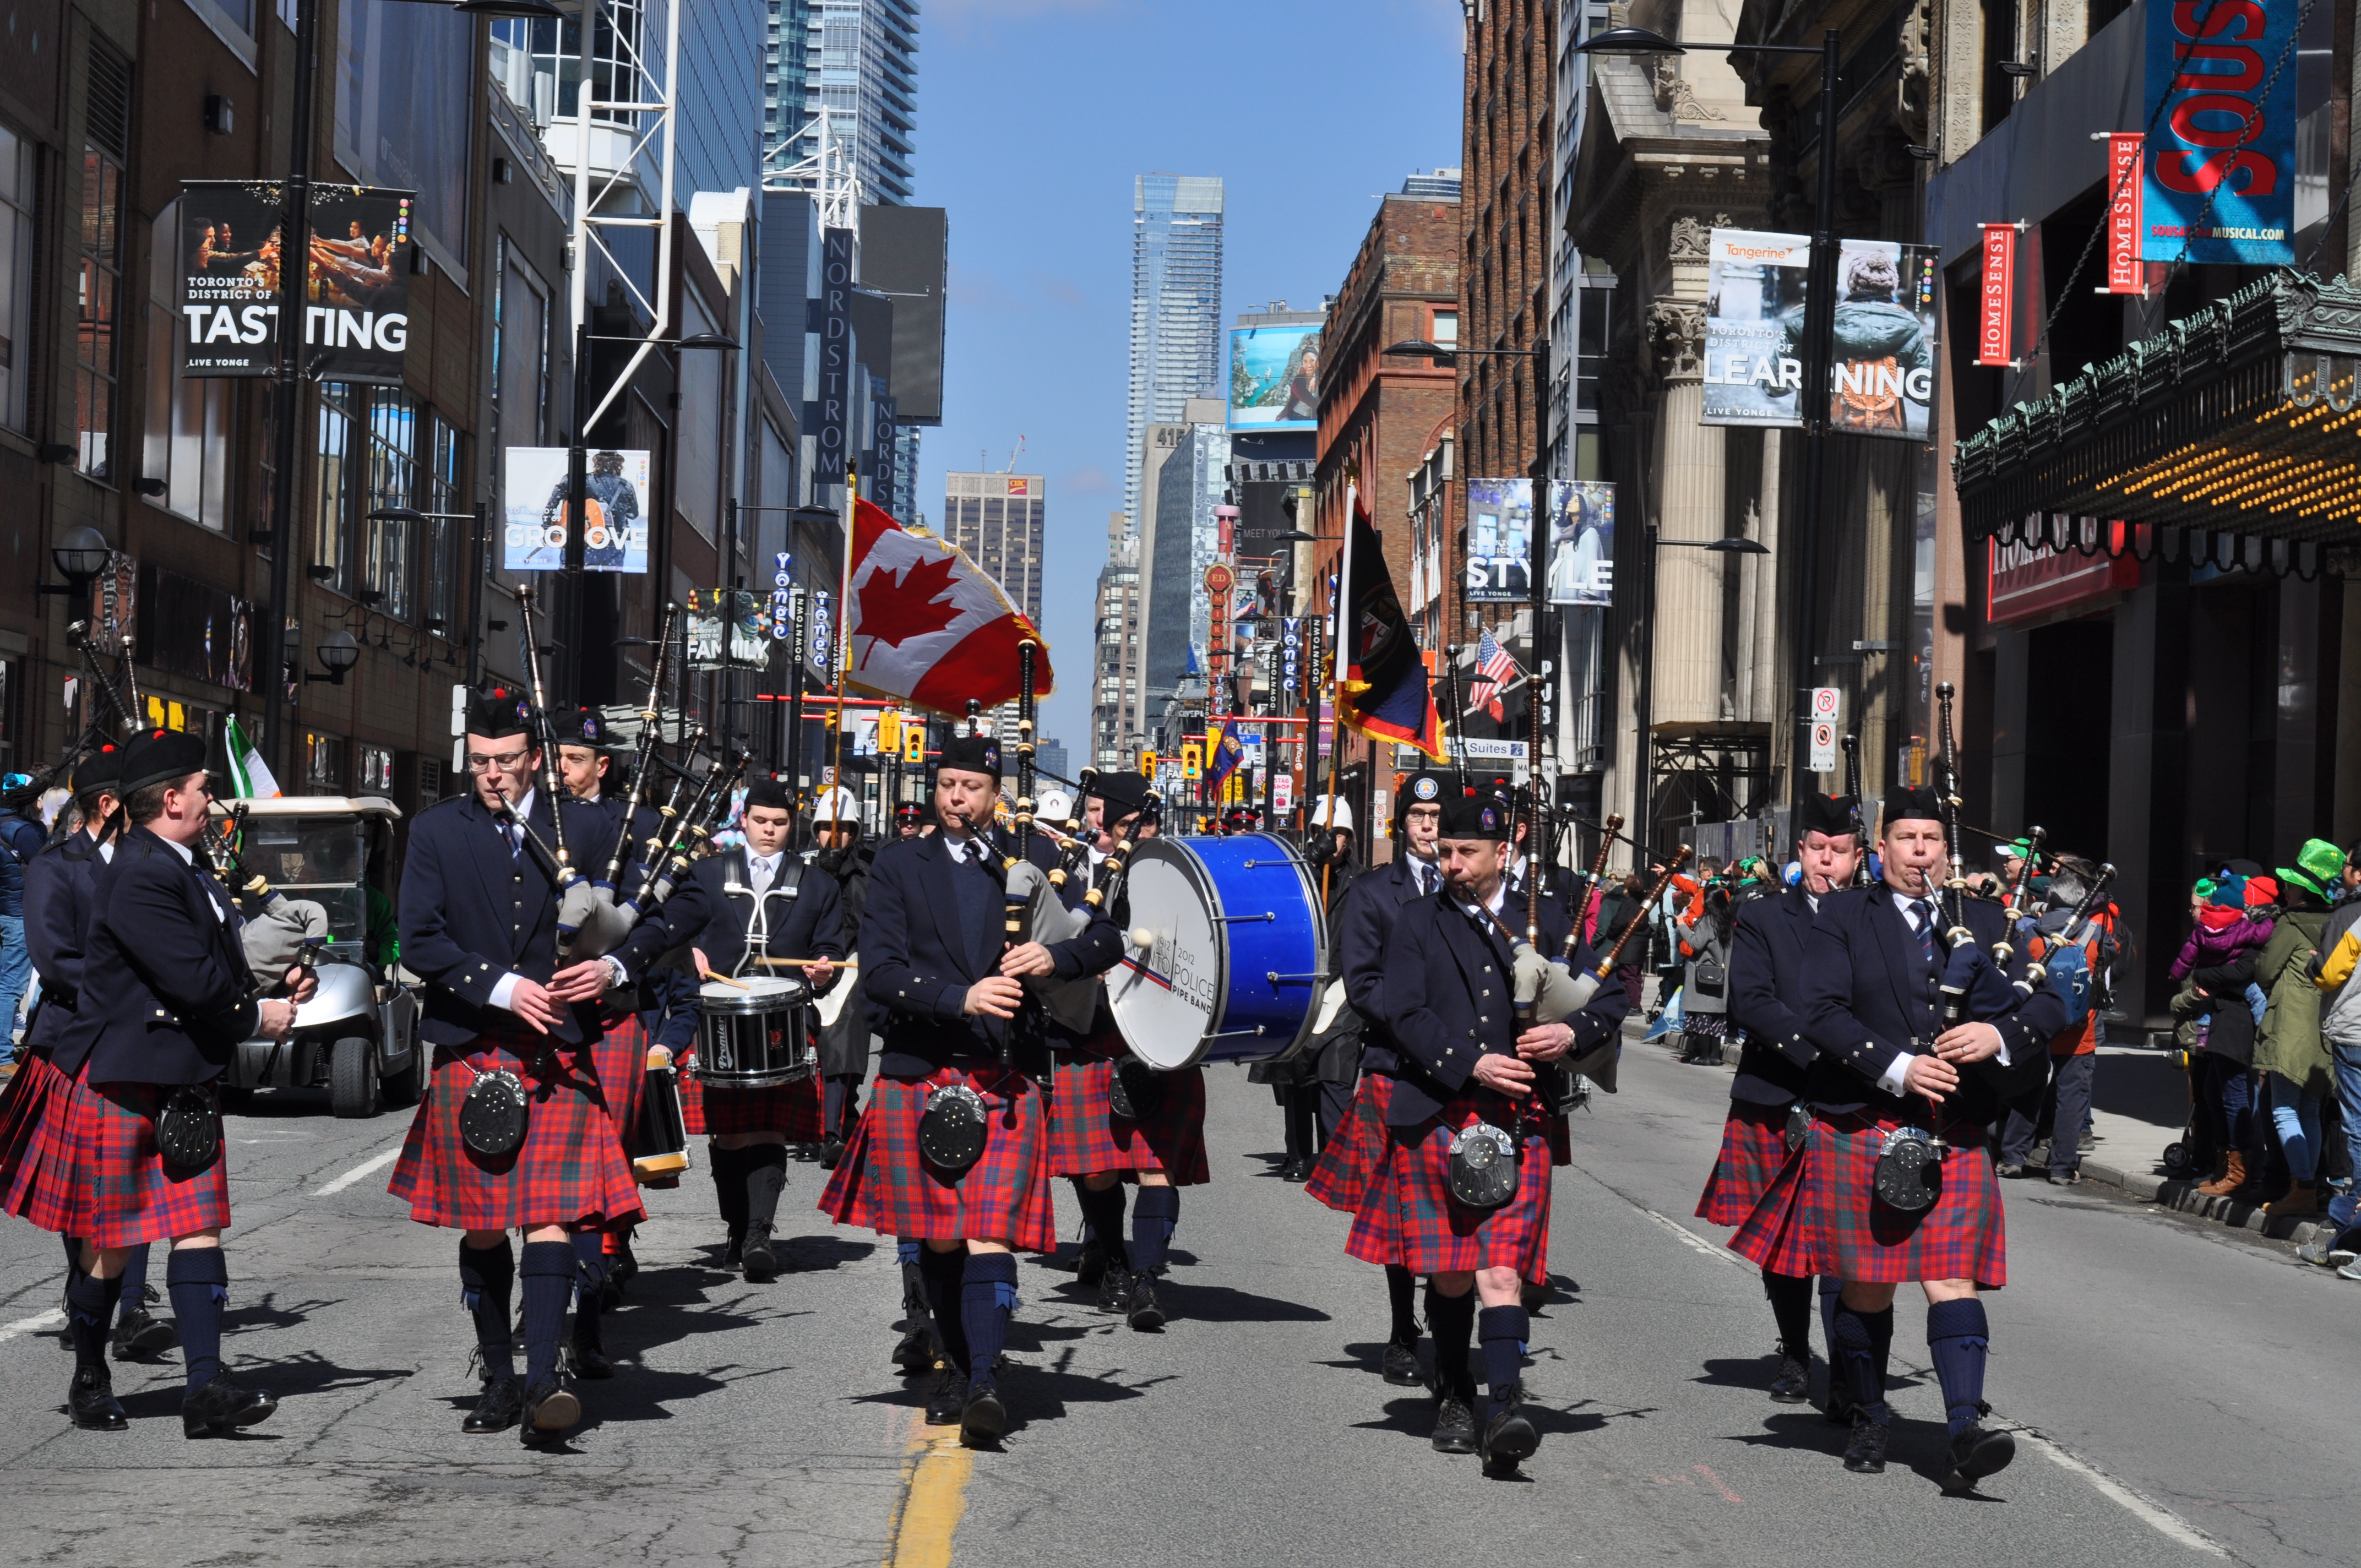 St. Patrick's Day Parade held in Toronto - Xinhua